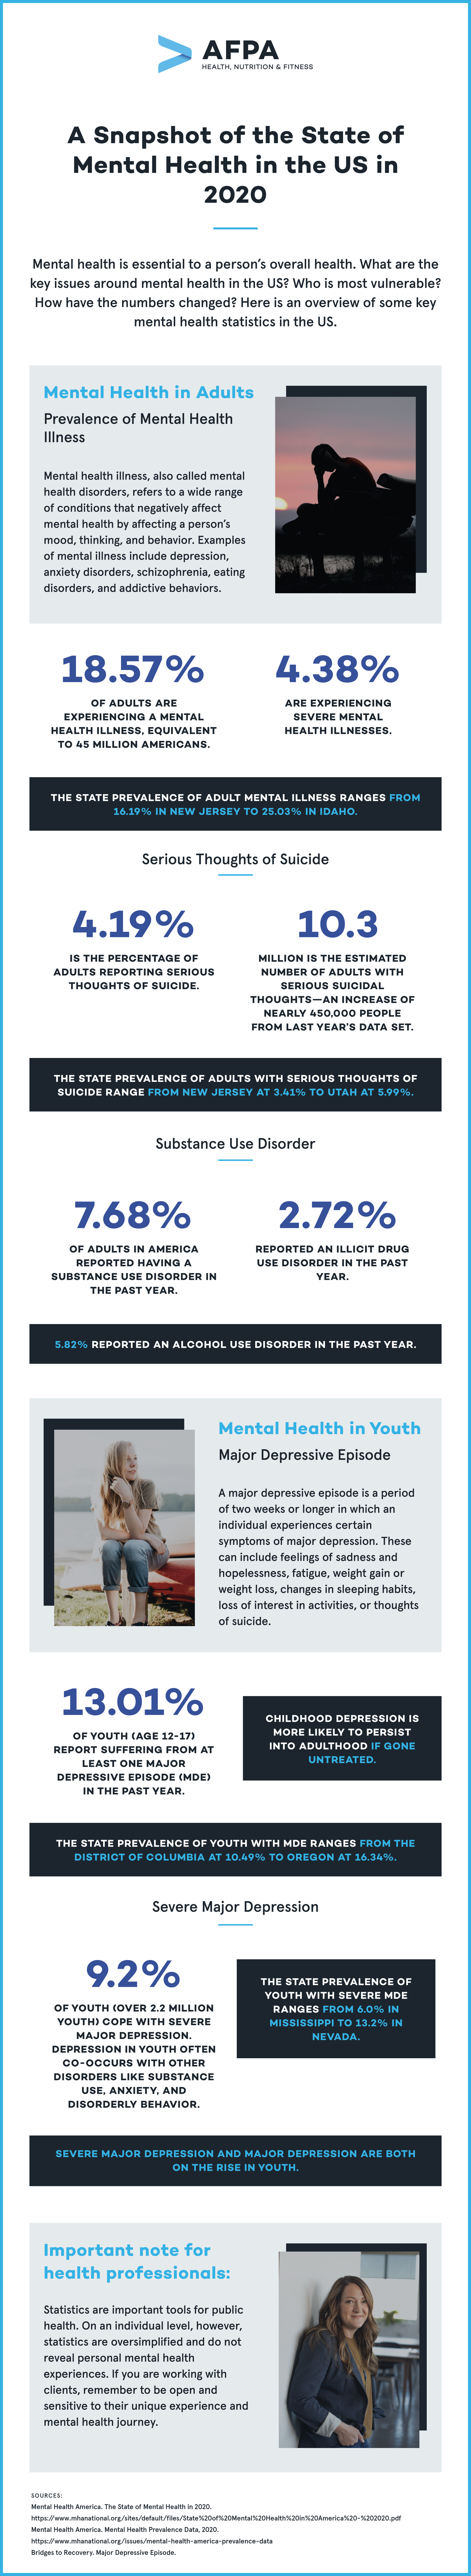 A Snapshot of the State of Mental Health_V2_2000